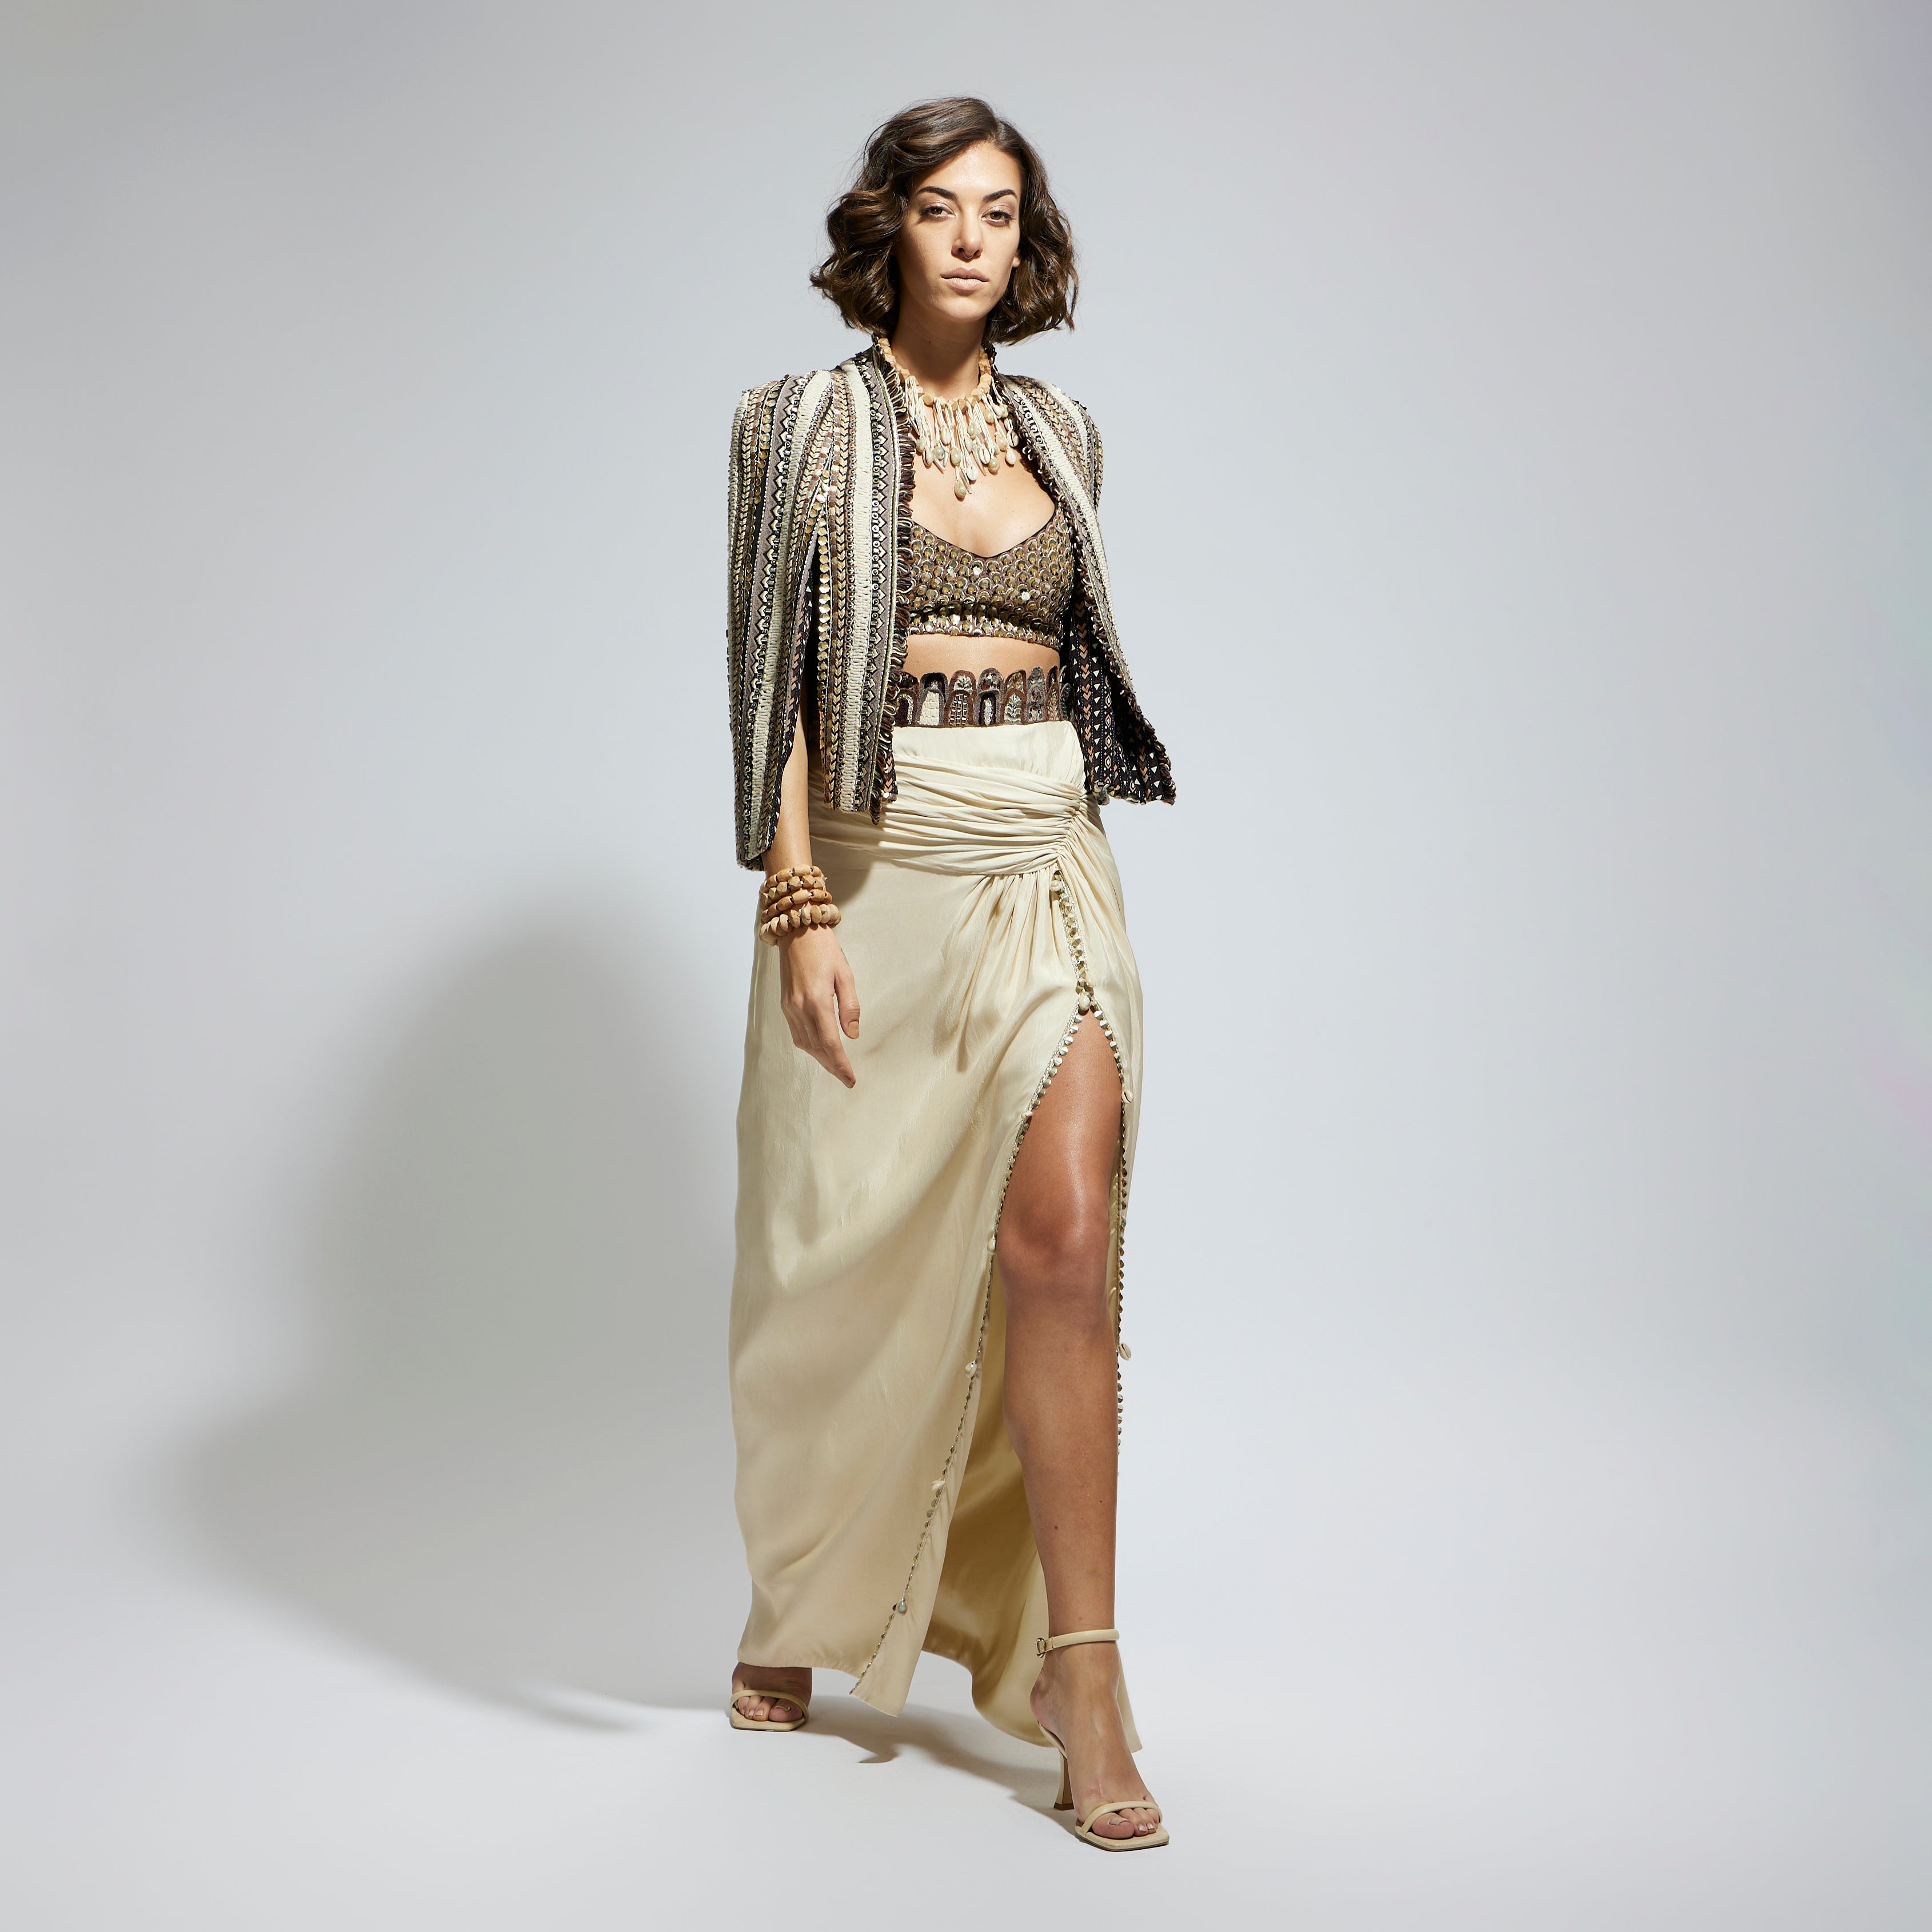 EMBELLISHED & TEXTURED CAPE JACKET PAIRED WITH METALLIC SCALLOP BUSTIER AND IVORY HIGH SLIT SKIRT